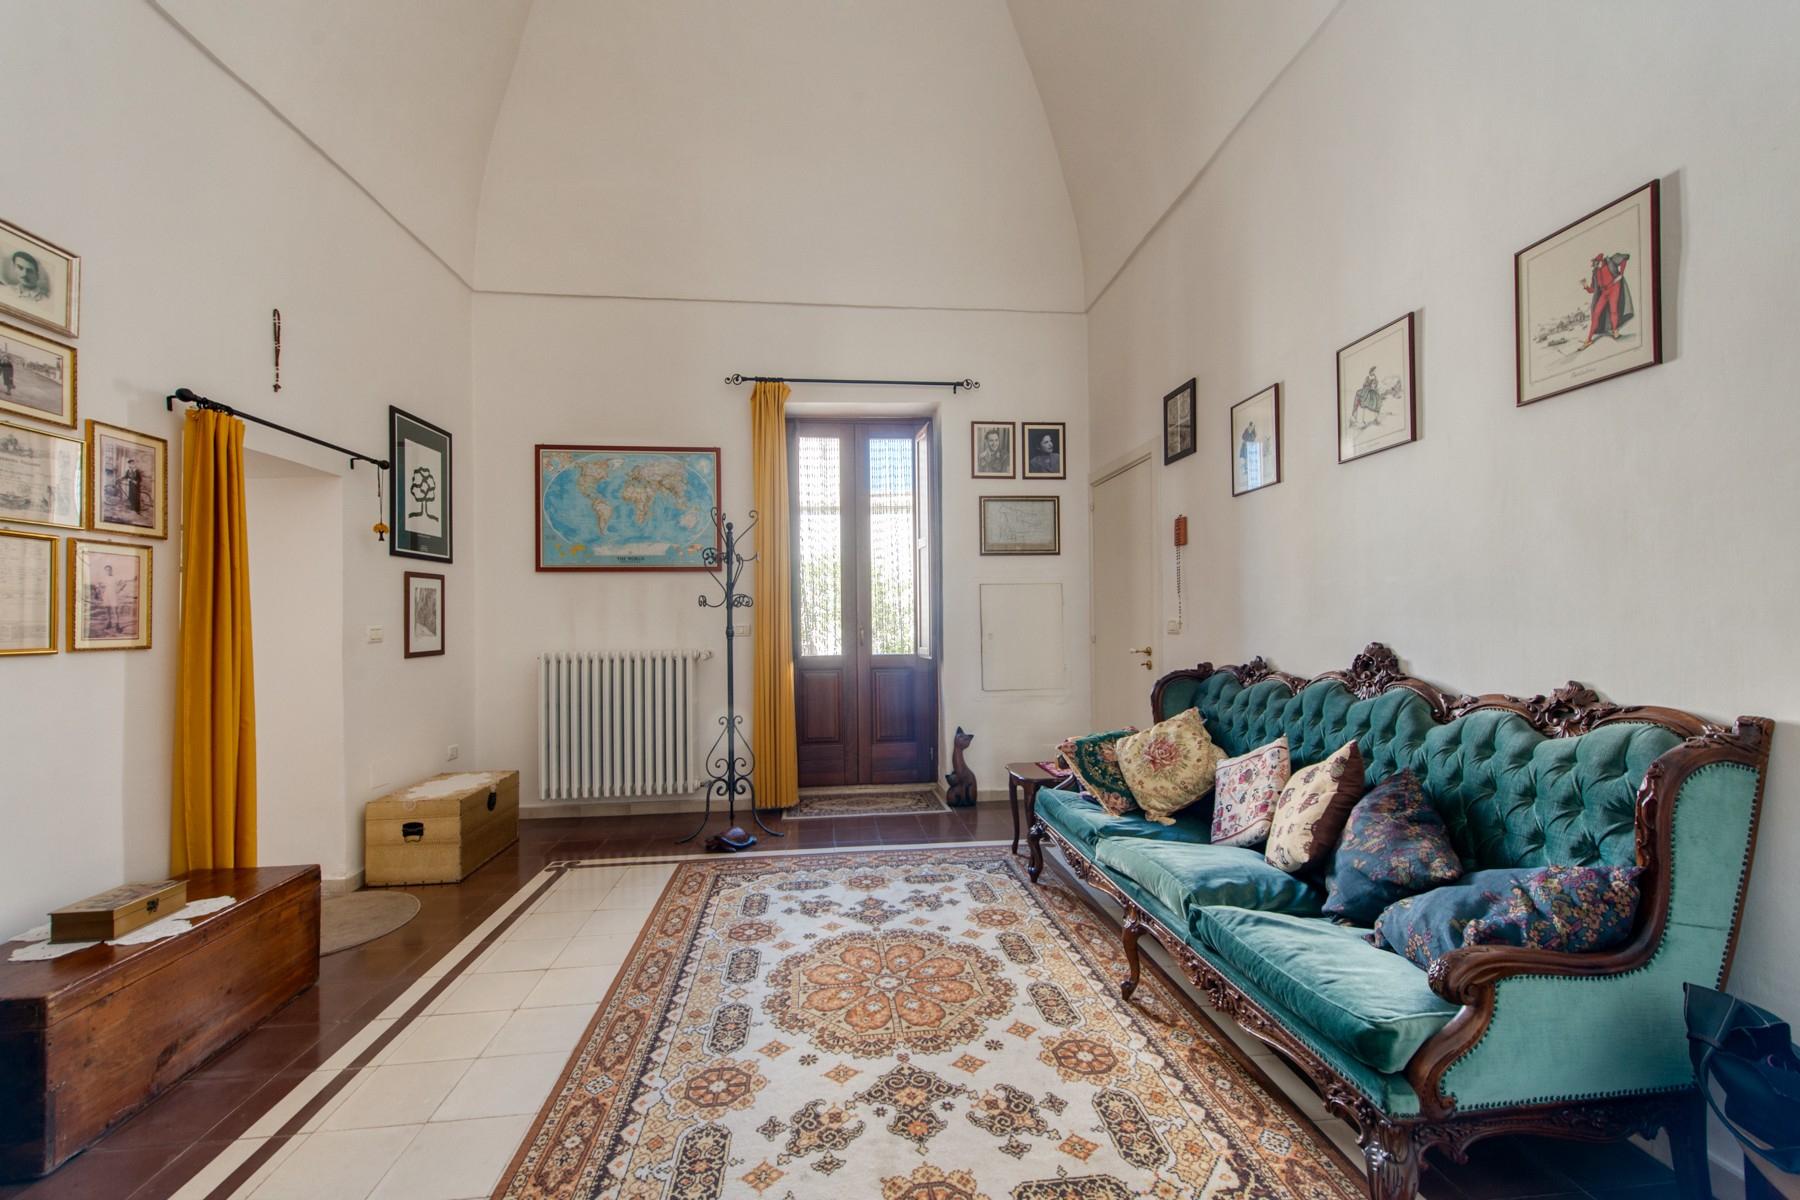 Perfectly renovated Palazzetto in the historic center of Parabita - 3